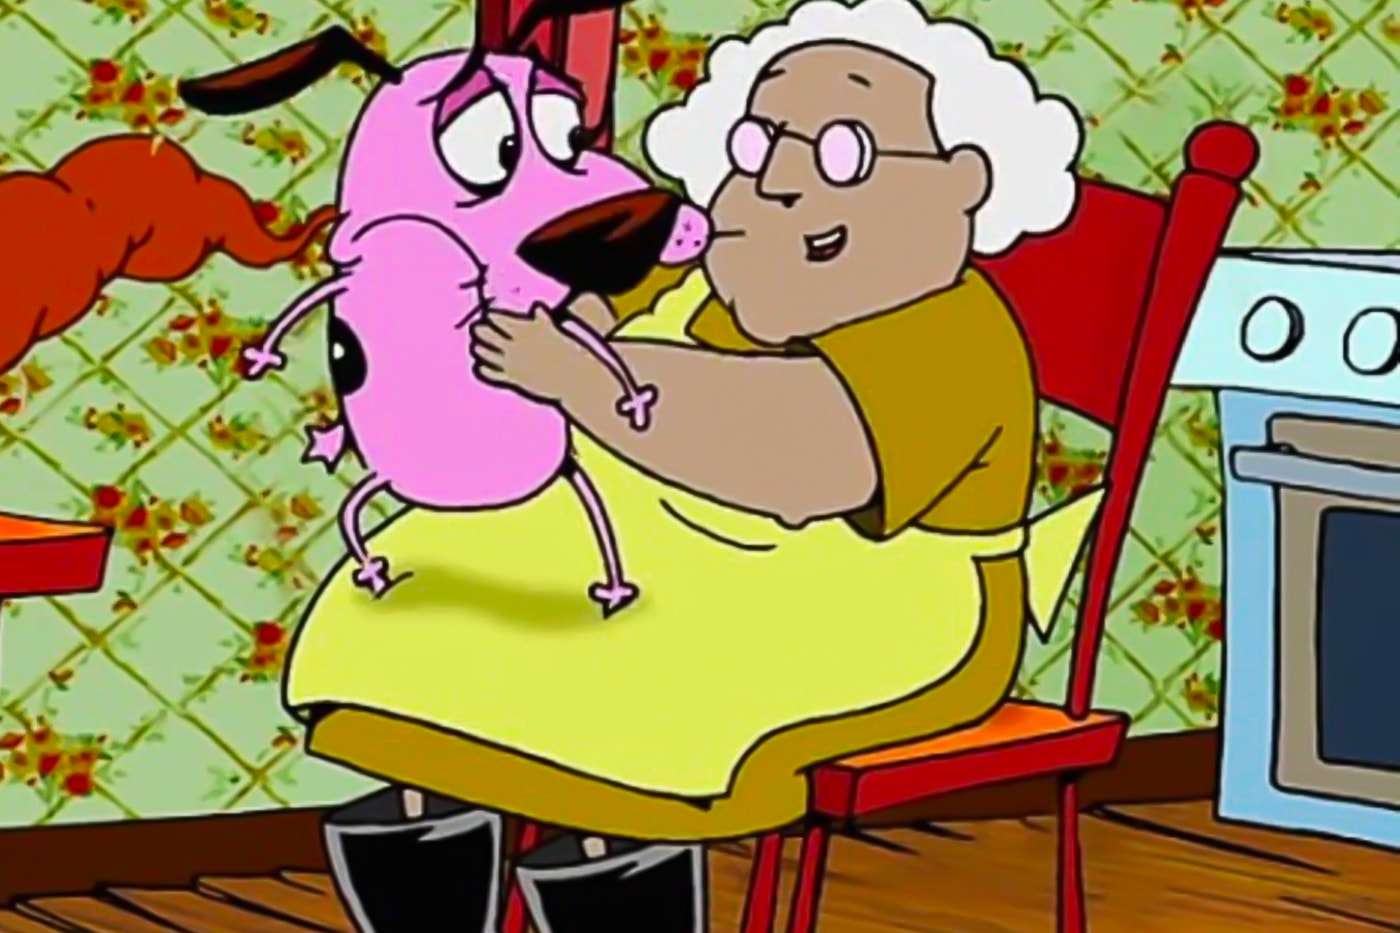 Courage the cowardly dog Muriel bagge Voice Actor Thea White dead 80 years old scooby doo crossover